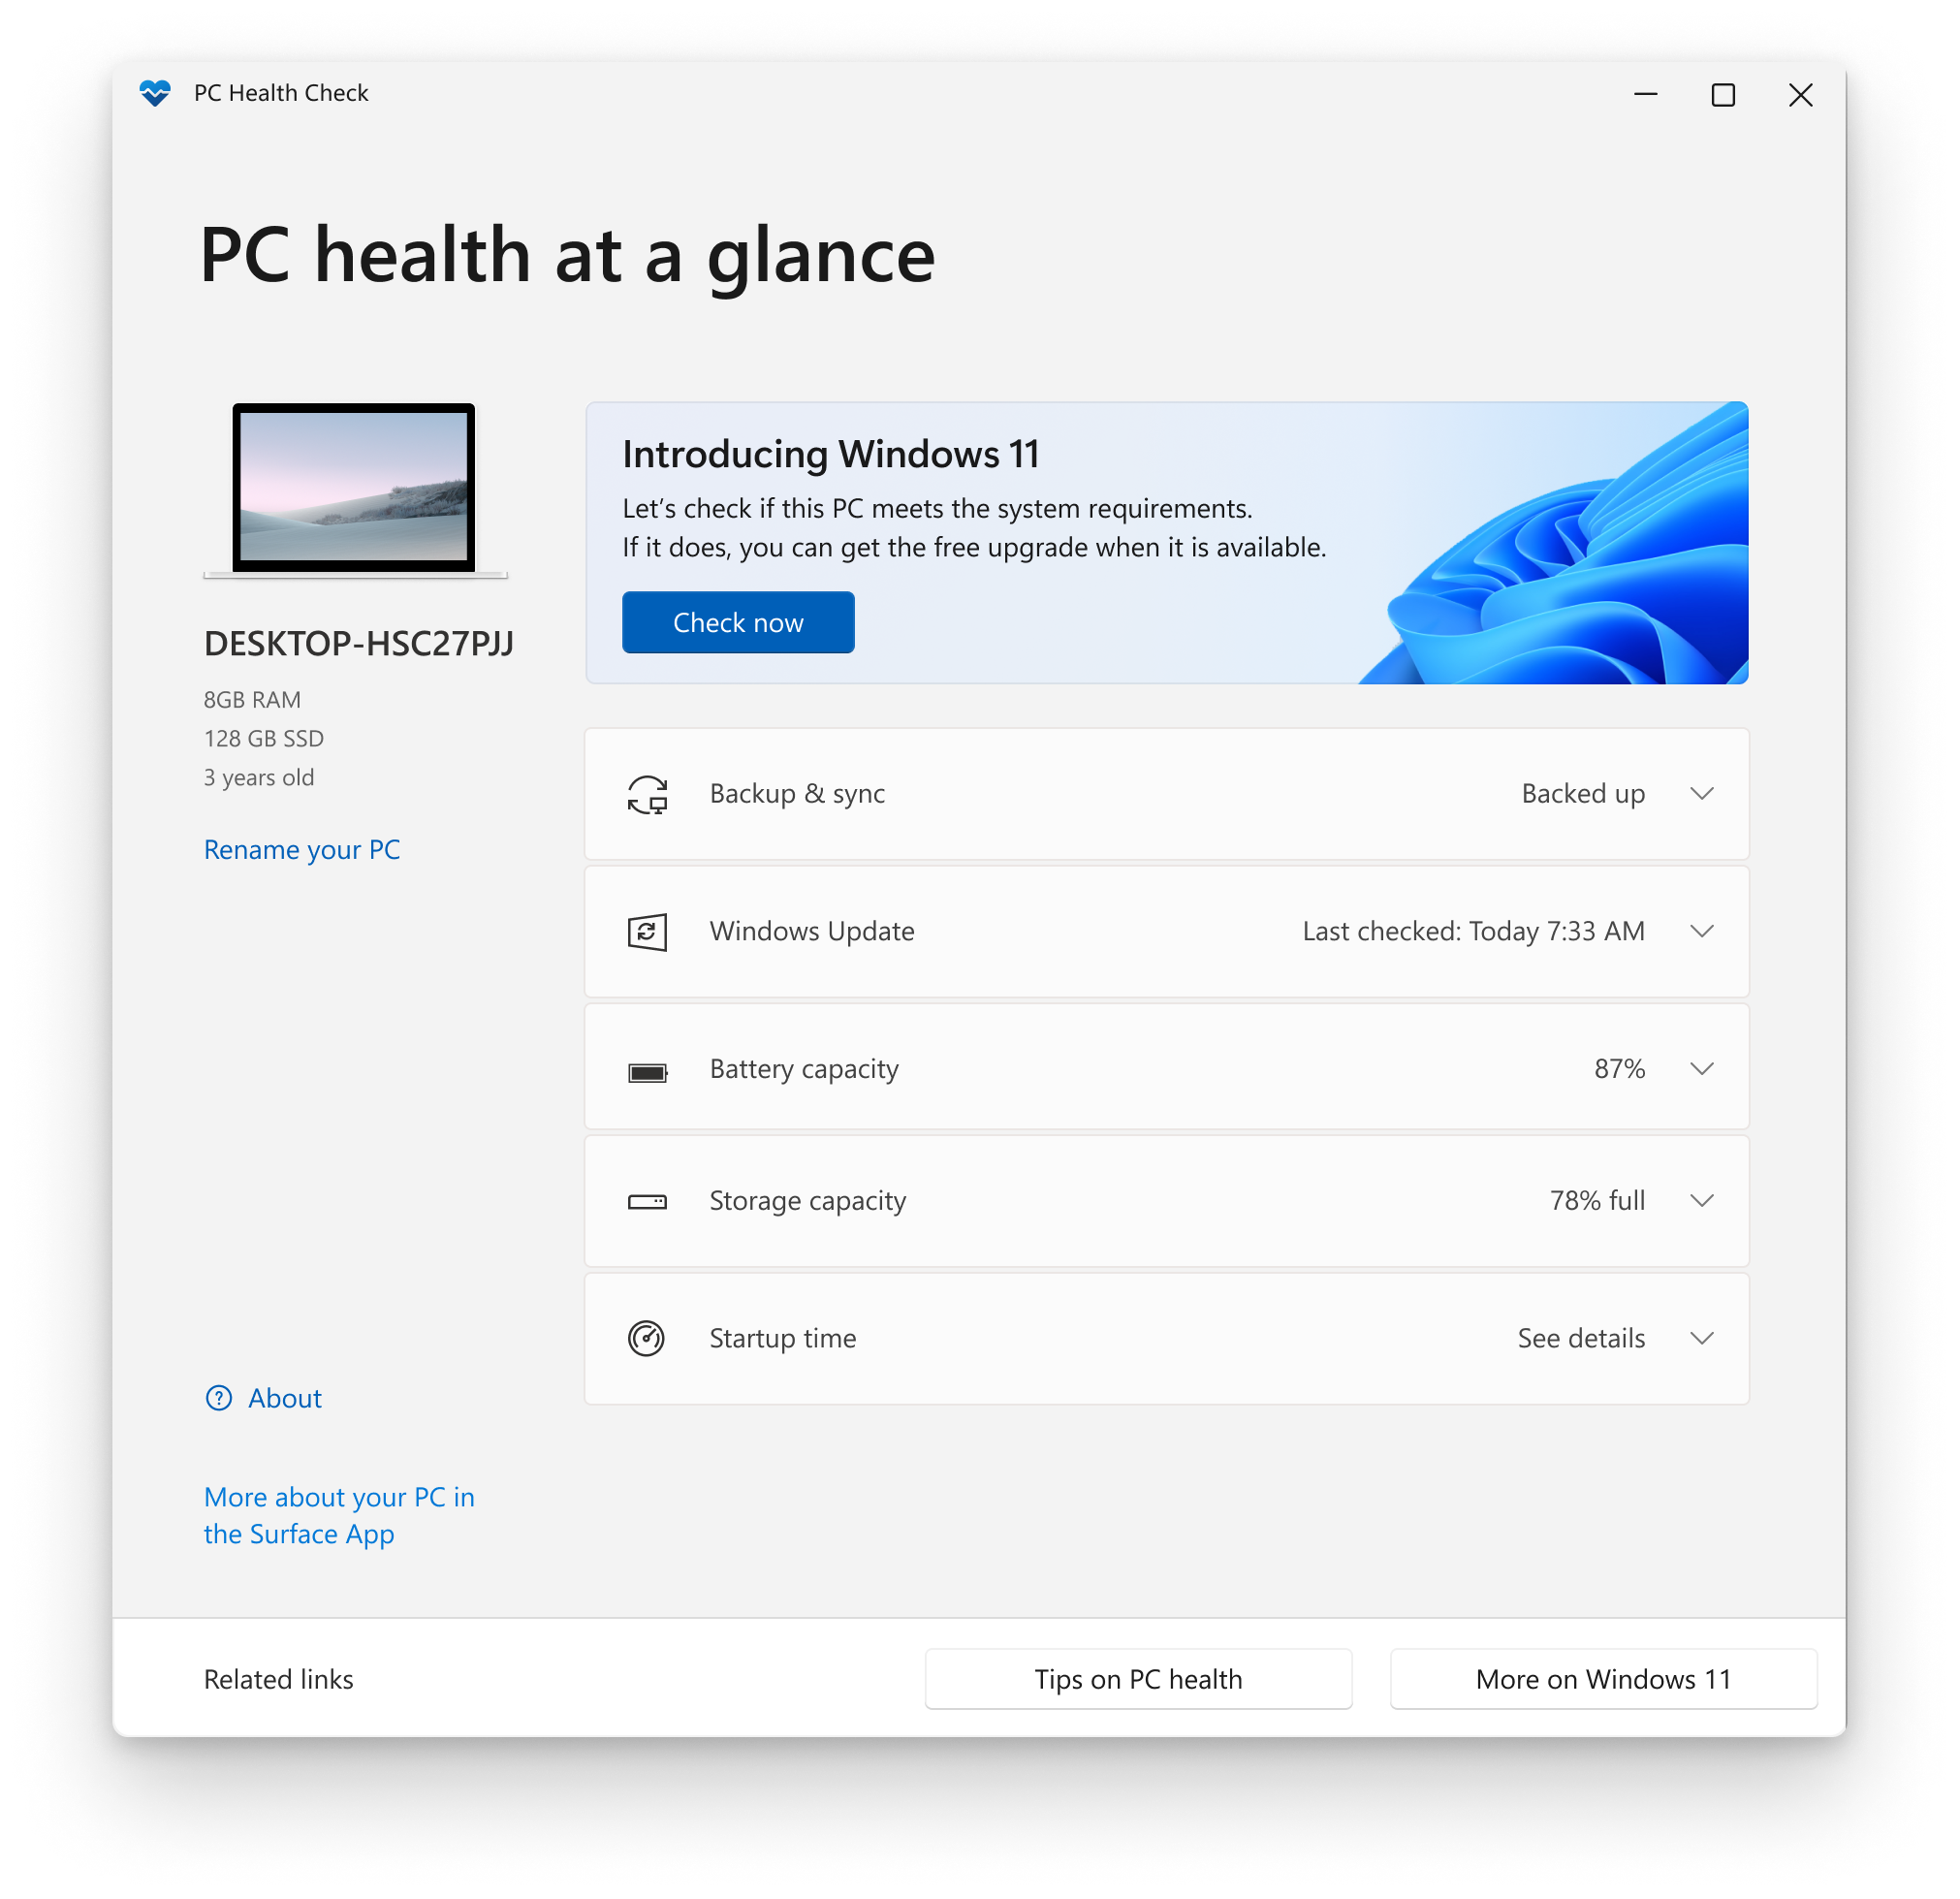 How to use the PC Health Check app